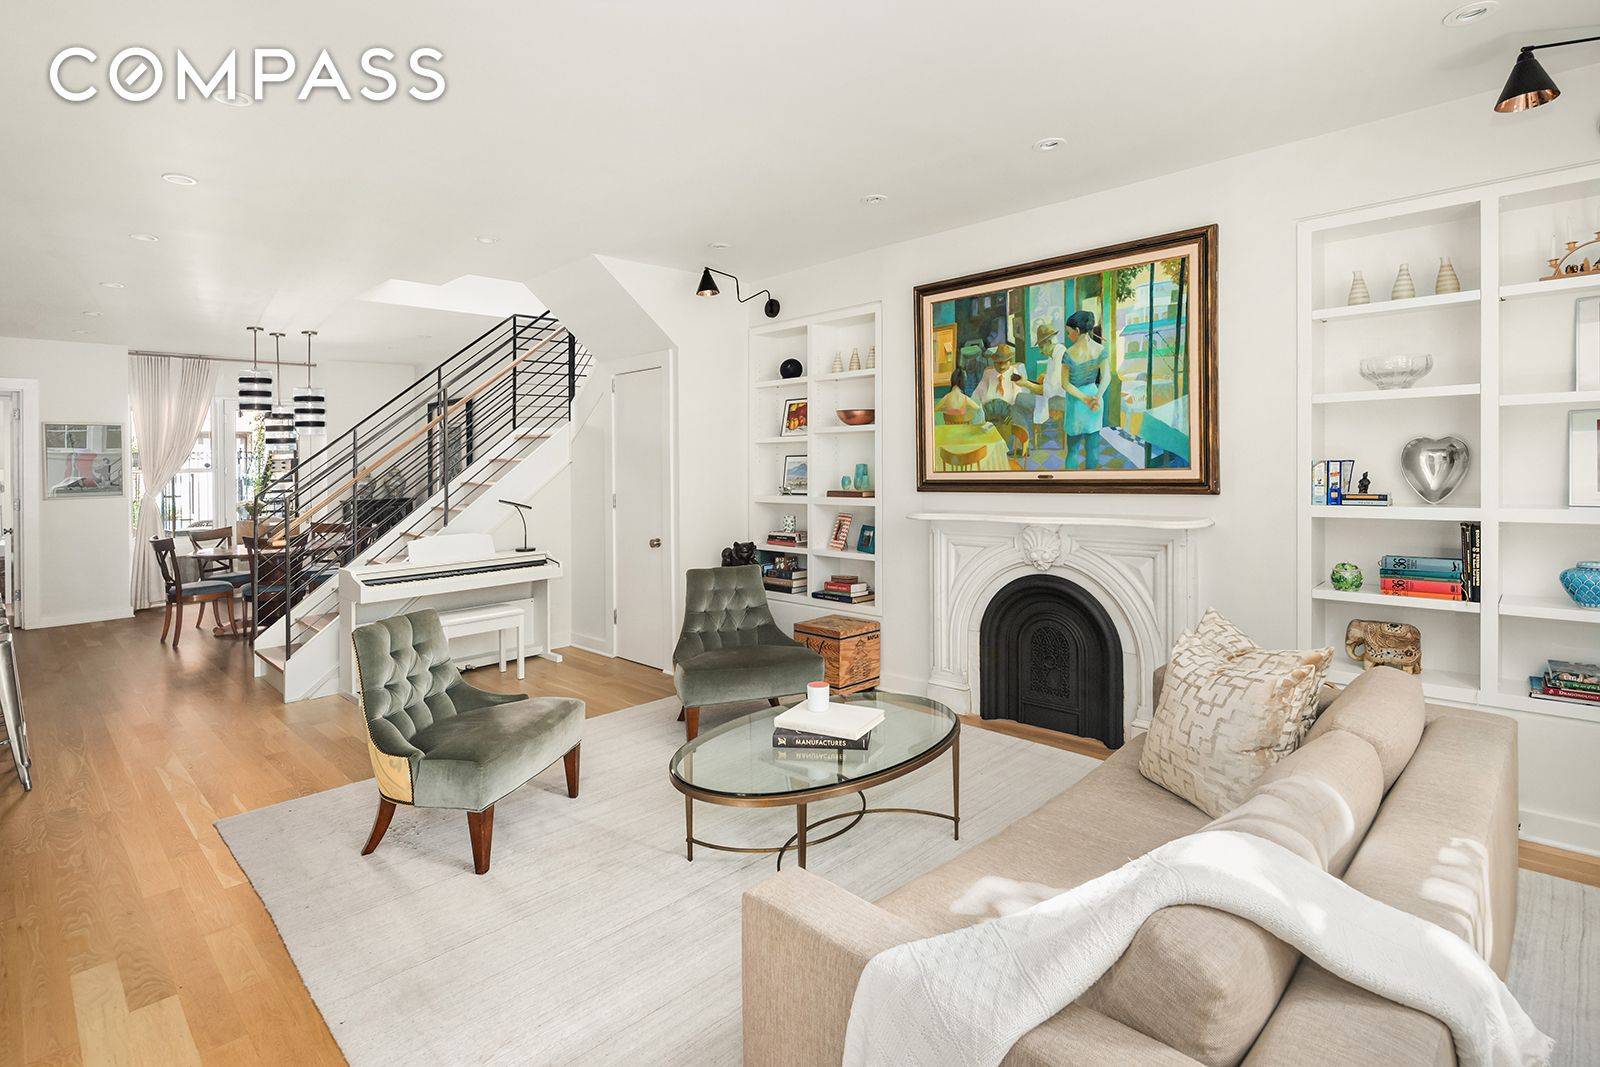 Welcome home to this one of a kind three bedroom duplex condo nestled on charming Warren Street in Cobble Hill.